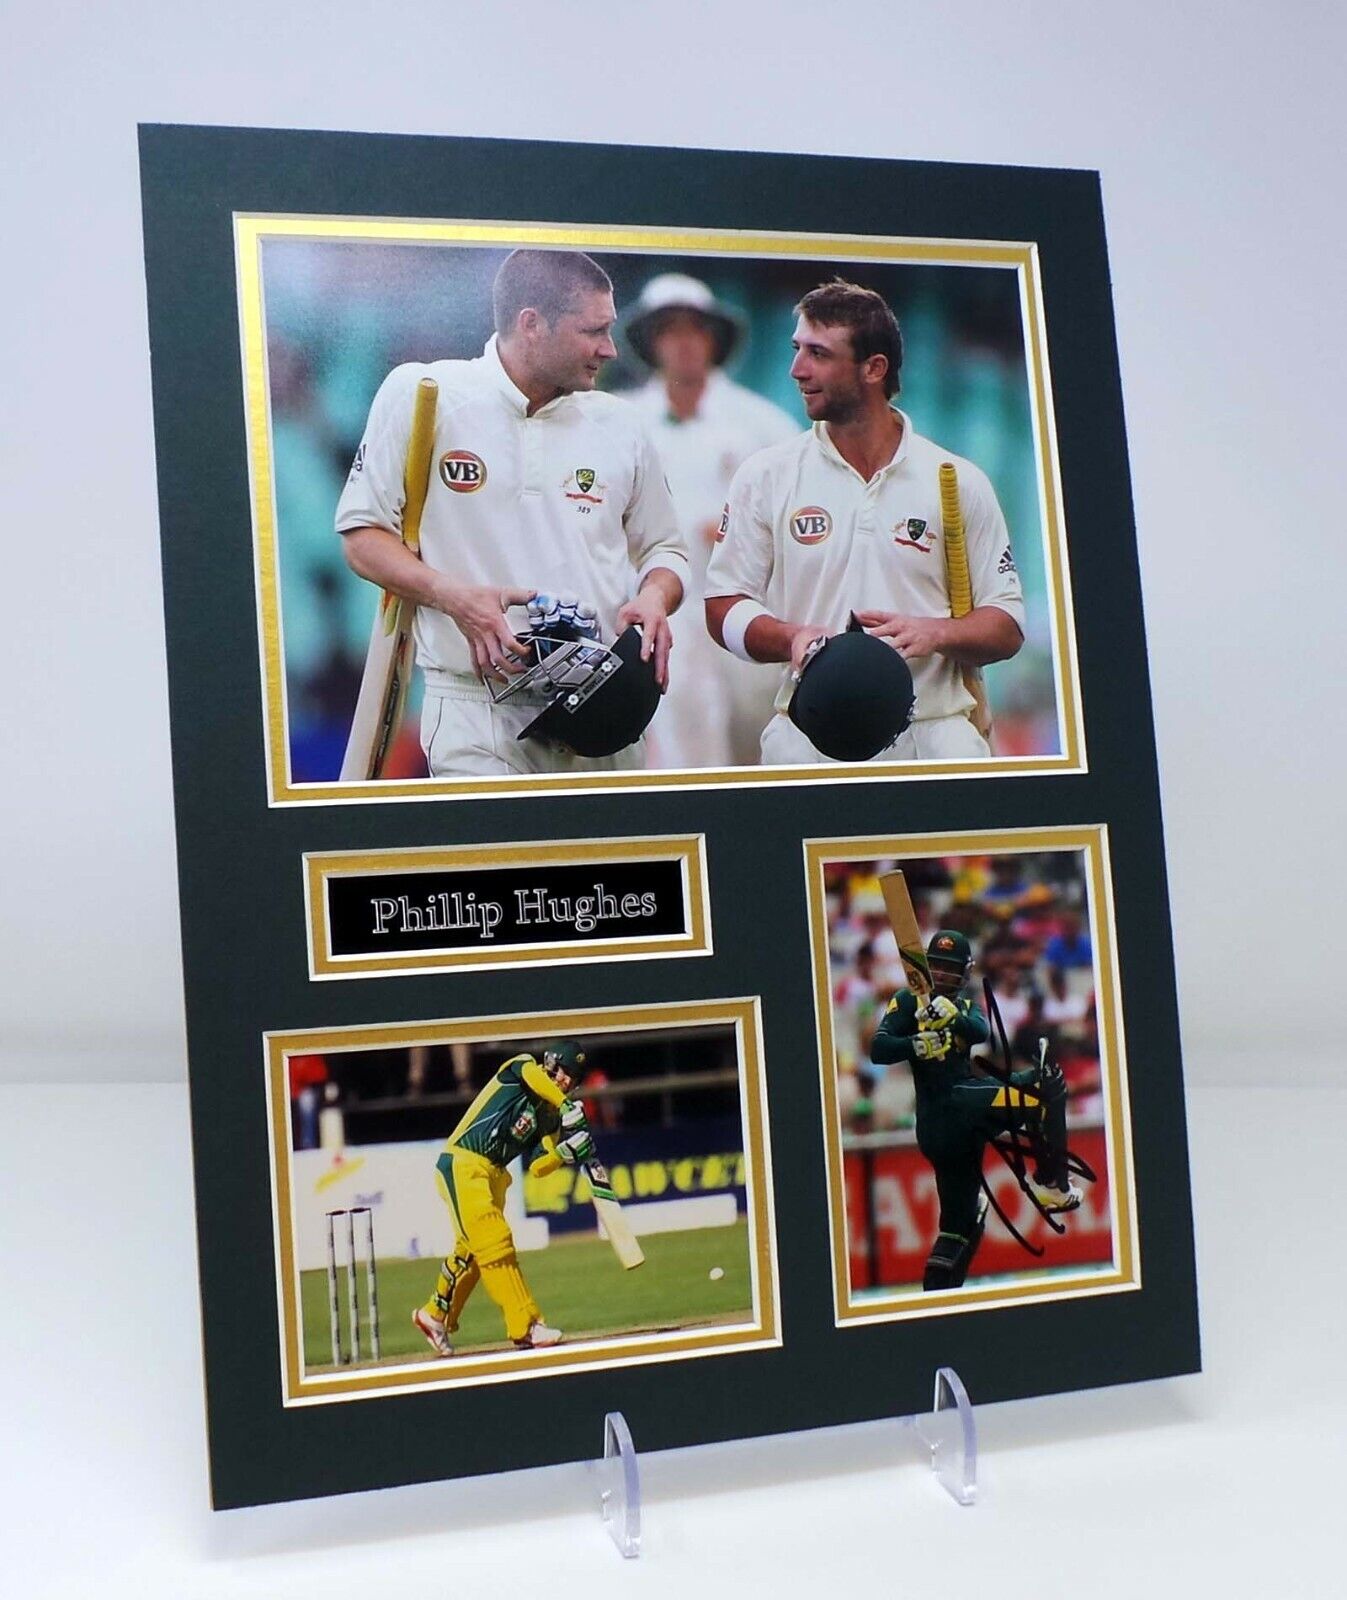 Phil Phillip HUGHES Signed Mounted Photo Poster painting Display COA AFTAL Austrialian Cricket